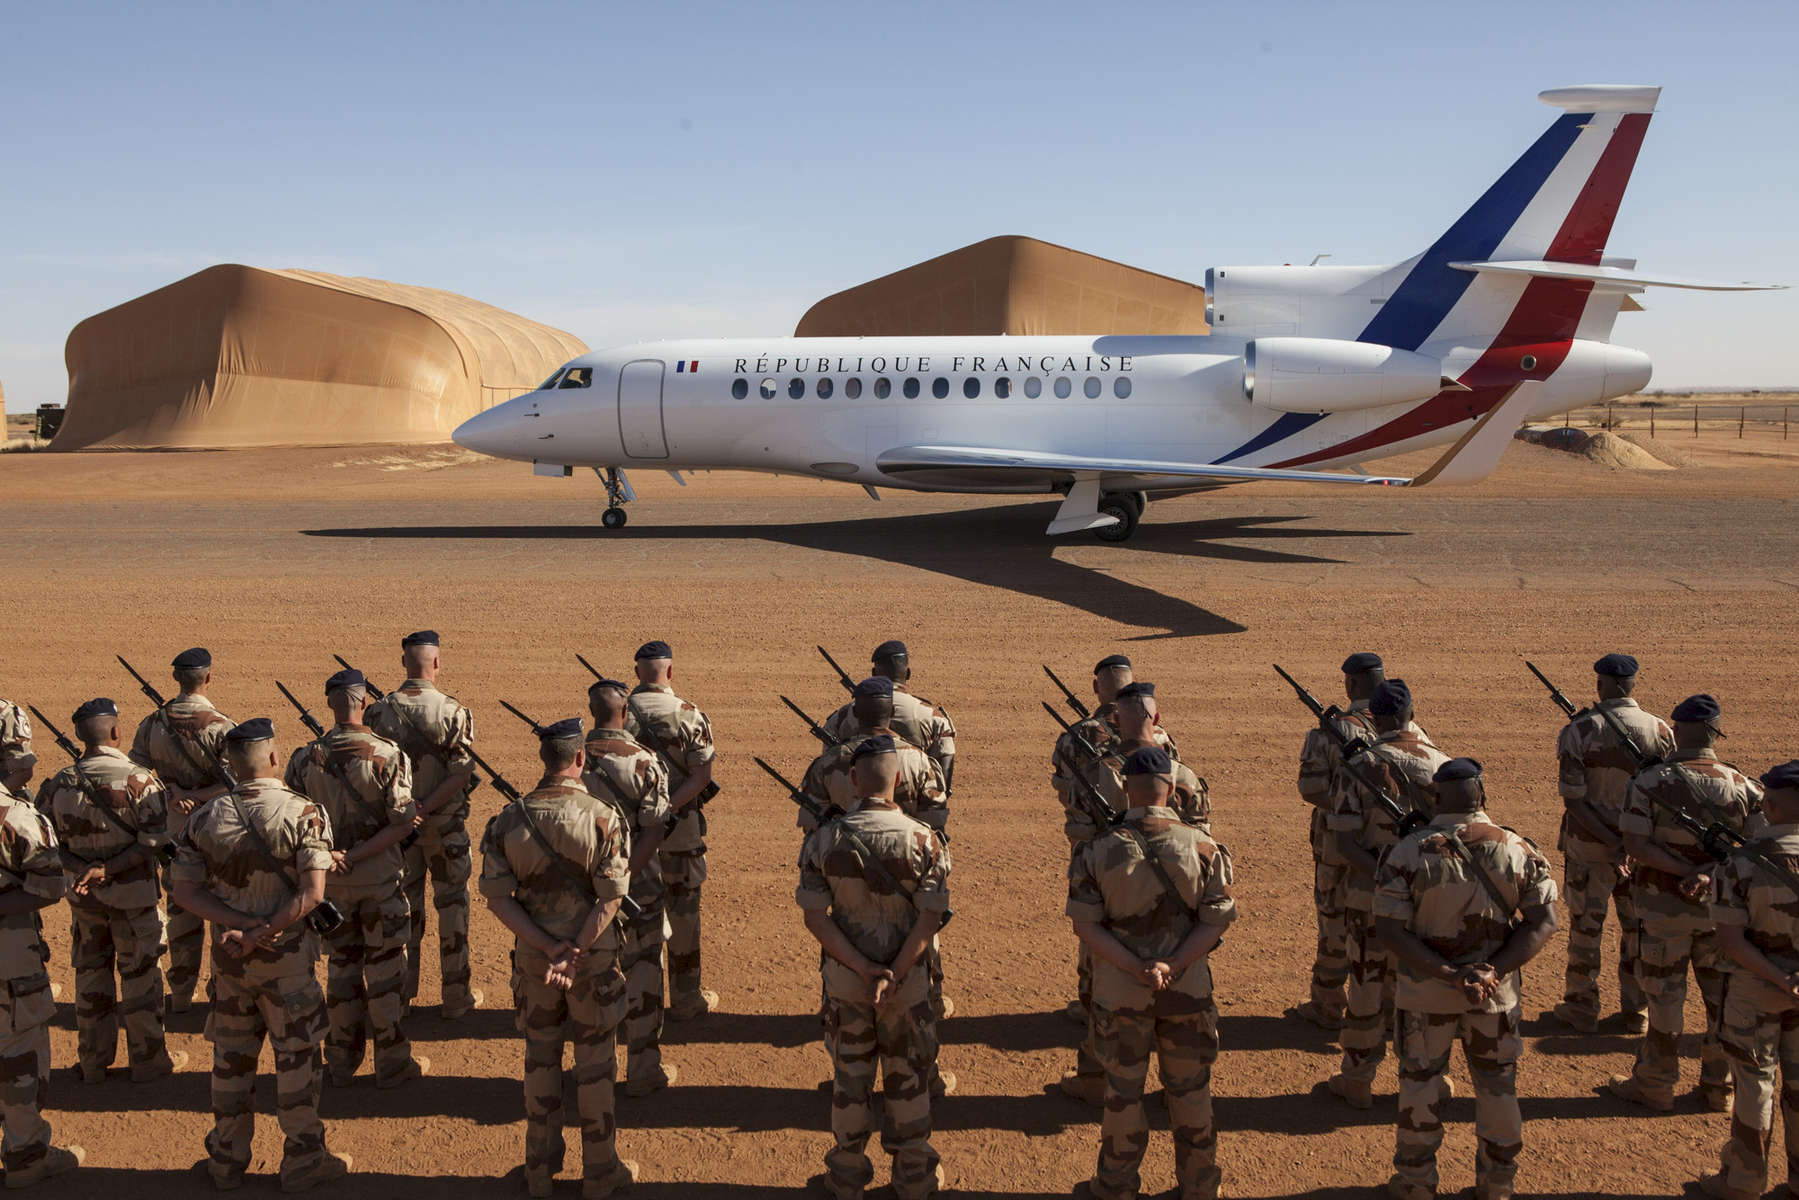 French troops part of Operation Barkhane stand at attention as French President Francois Hollande's private jet lands in Gao, Mali on Friday, January 13, 2017.